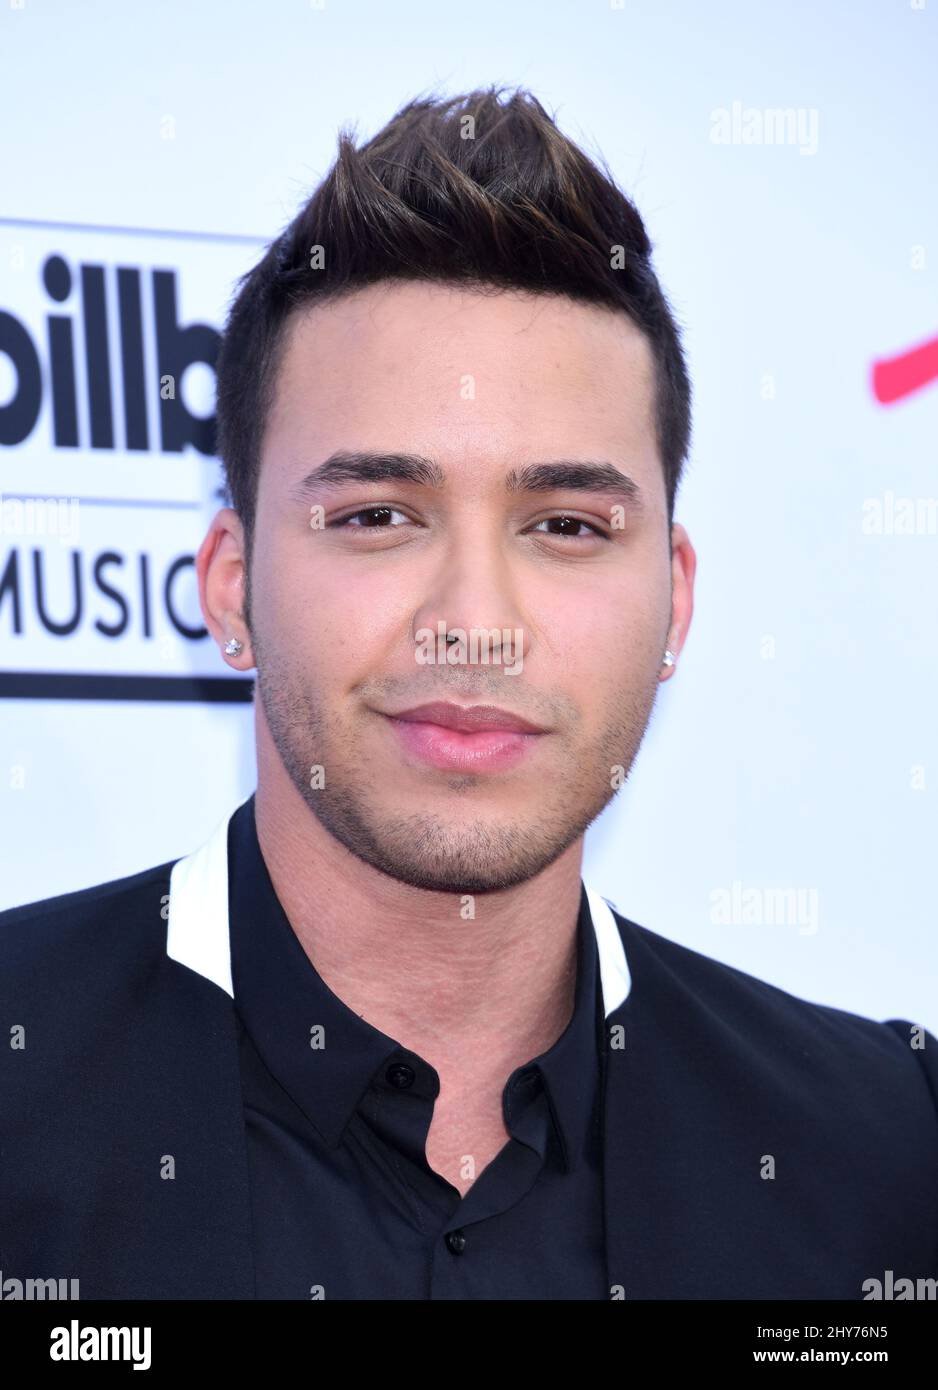 Prince Royce arriving at the 2015 Billboard Music Awards held at the MGM Grand Garden Arena Stock Photo